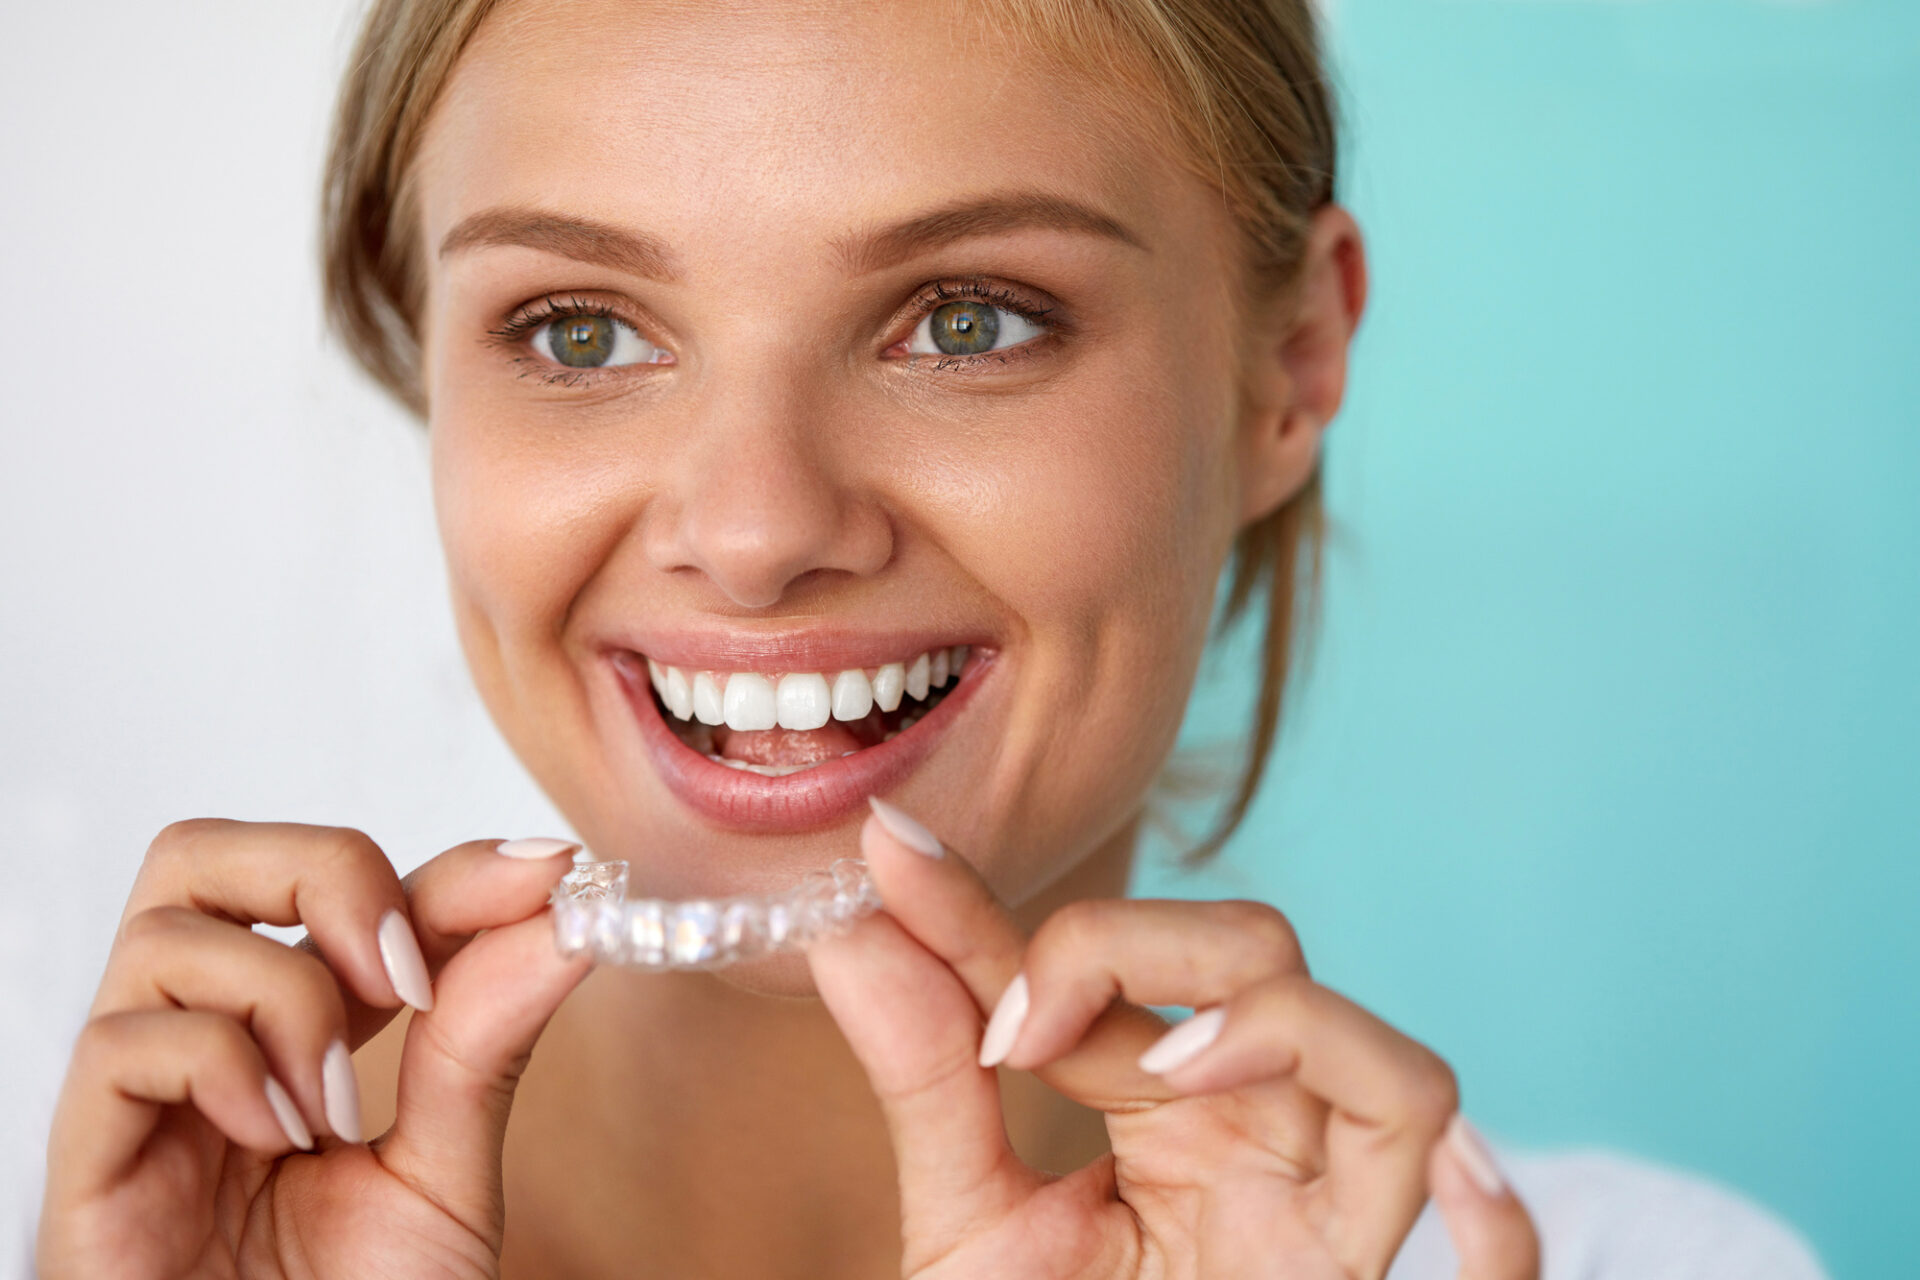 What is the difference in cost between braces and Invisalign?